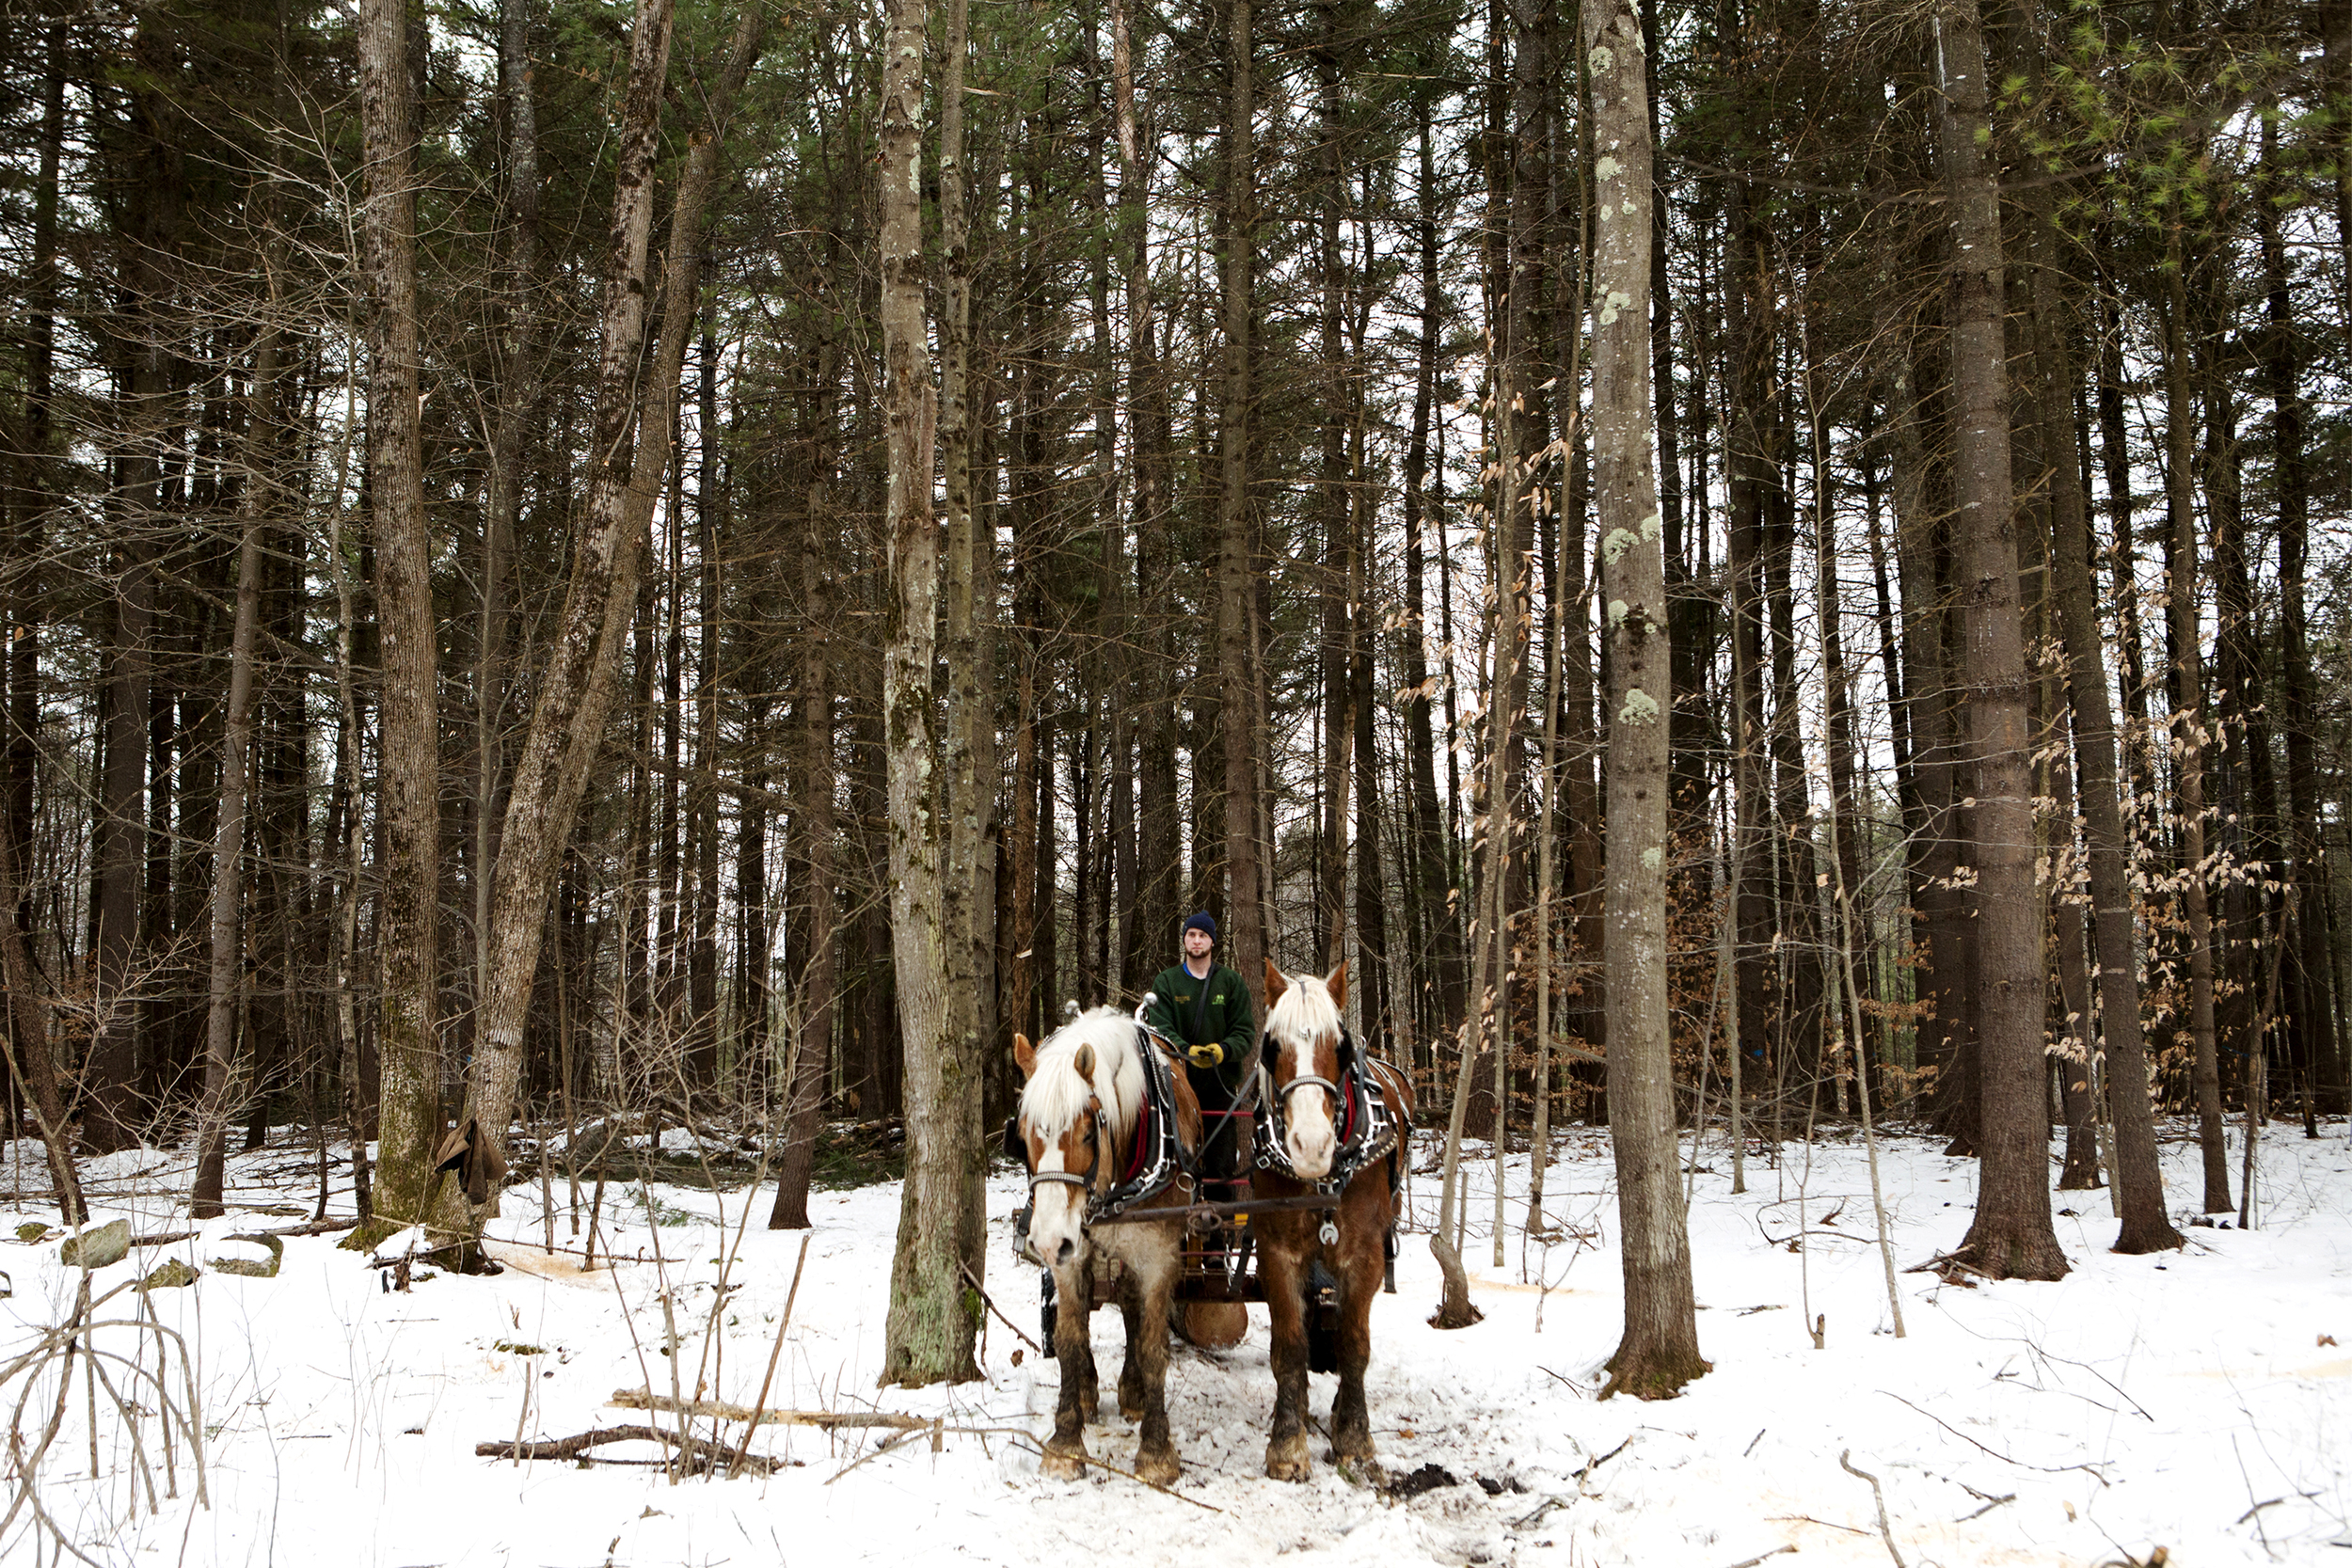  Jackson Riel and &nbsp;his team of draft horses, Captain, left, and Duke, pull a freshly cut pine out of the woods behind Grange Hall in Chichester, N.H. on February 1, 2014.&nbsp;The Chichester Conservation Commission thinned out the woods using dr